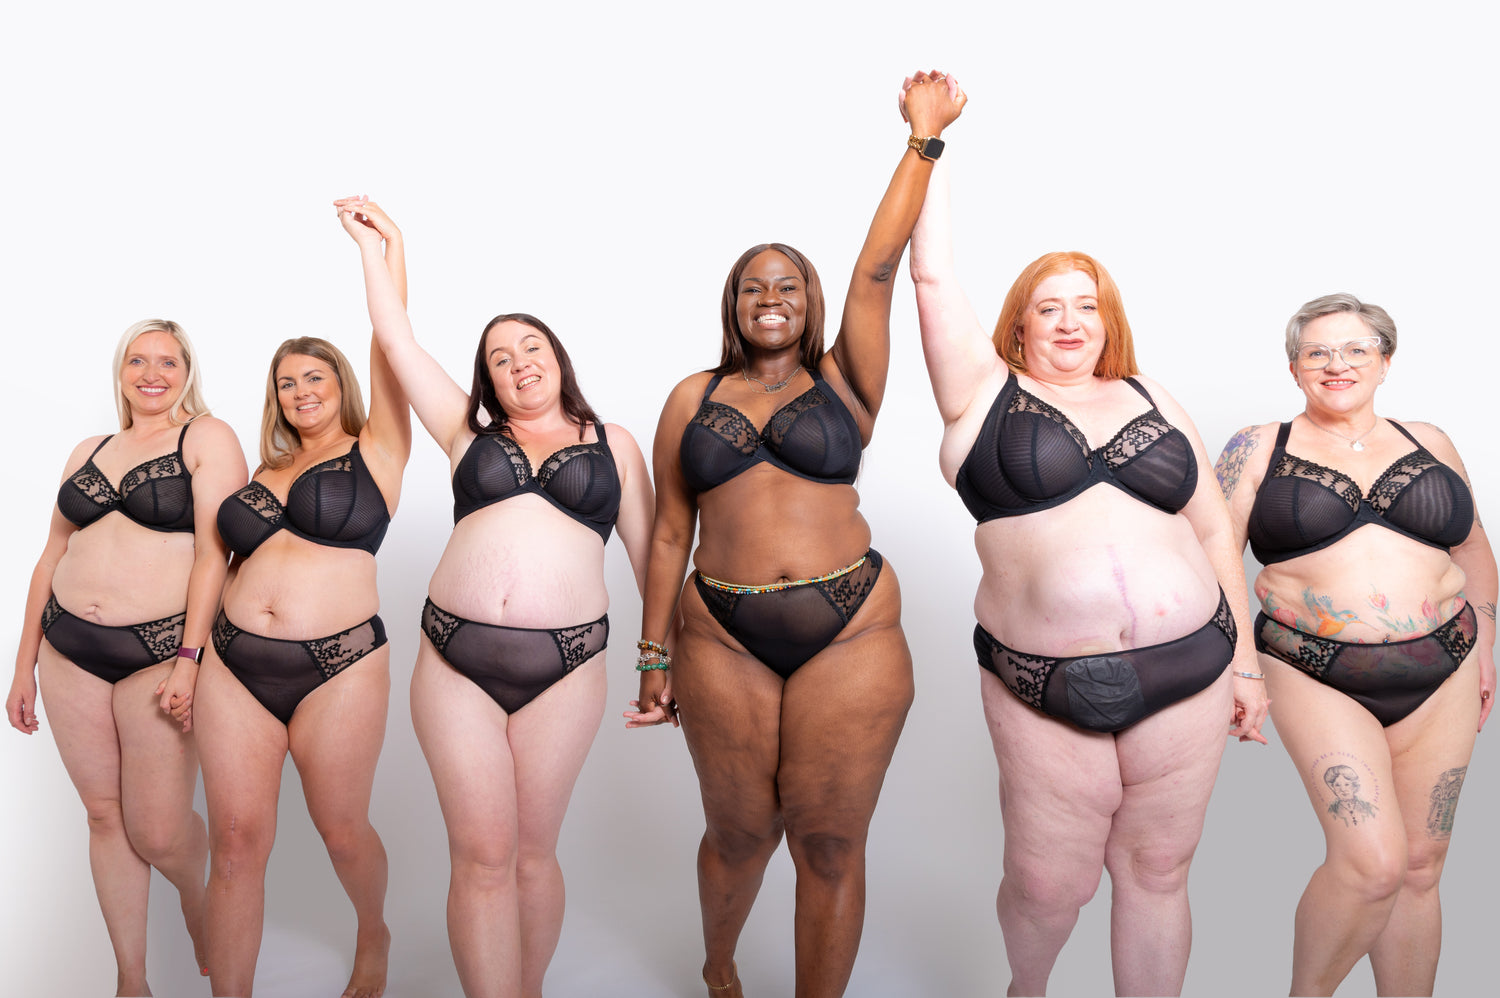 Virtual Bra Fitter Recruitment  Become a Virtual Bra Fitter for Curvy –  Curvy Kate US